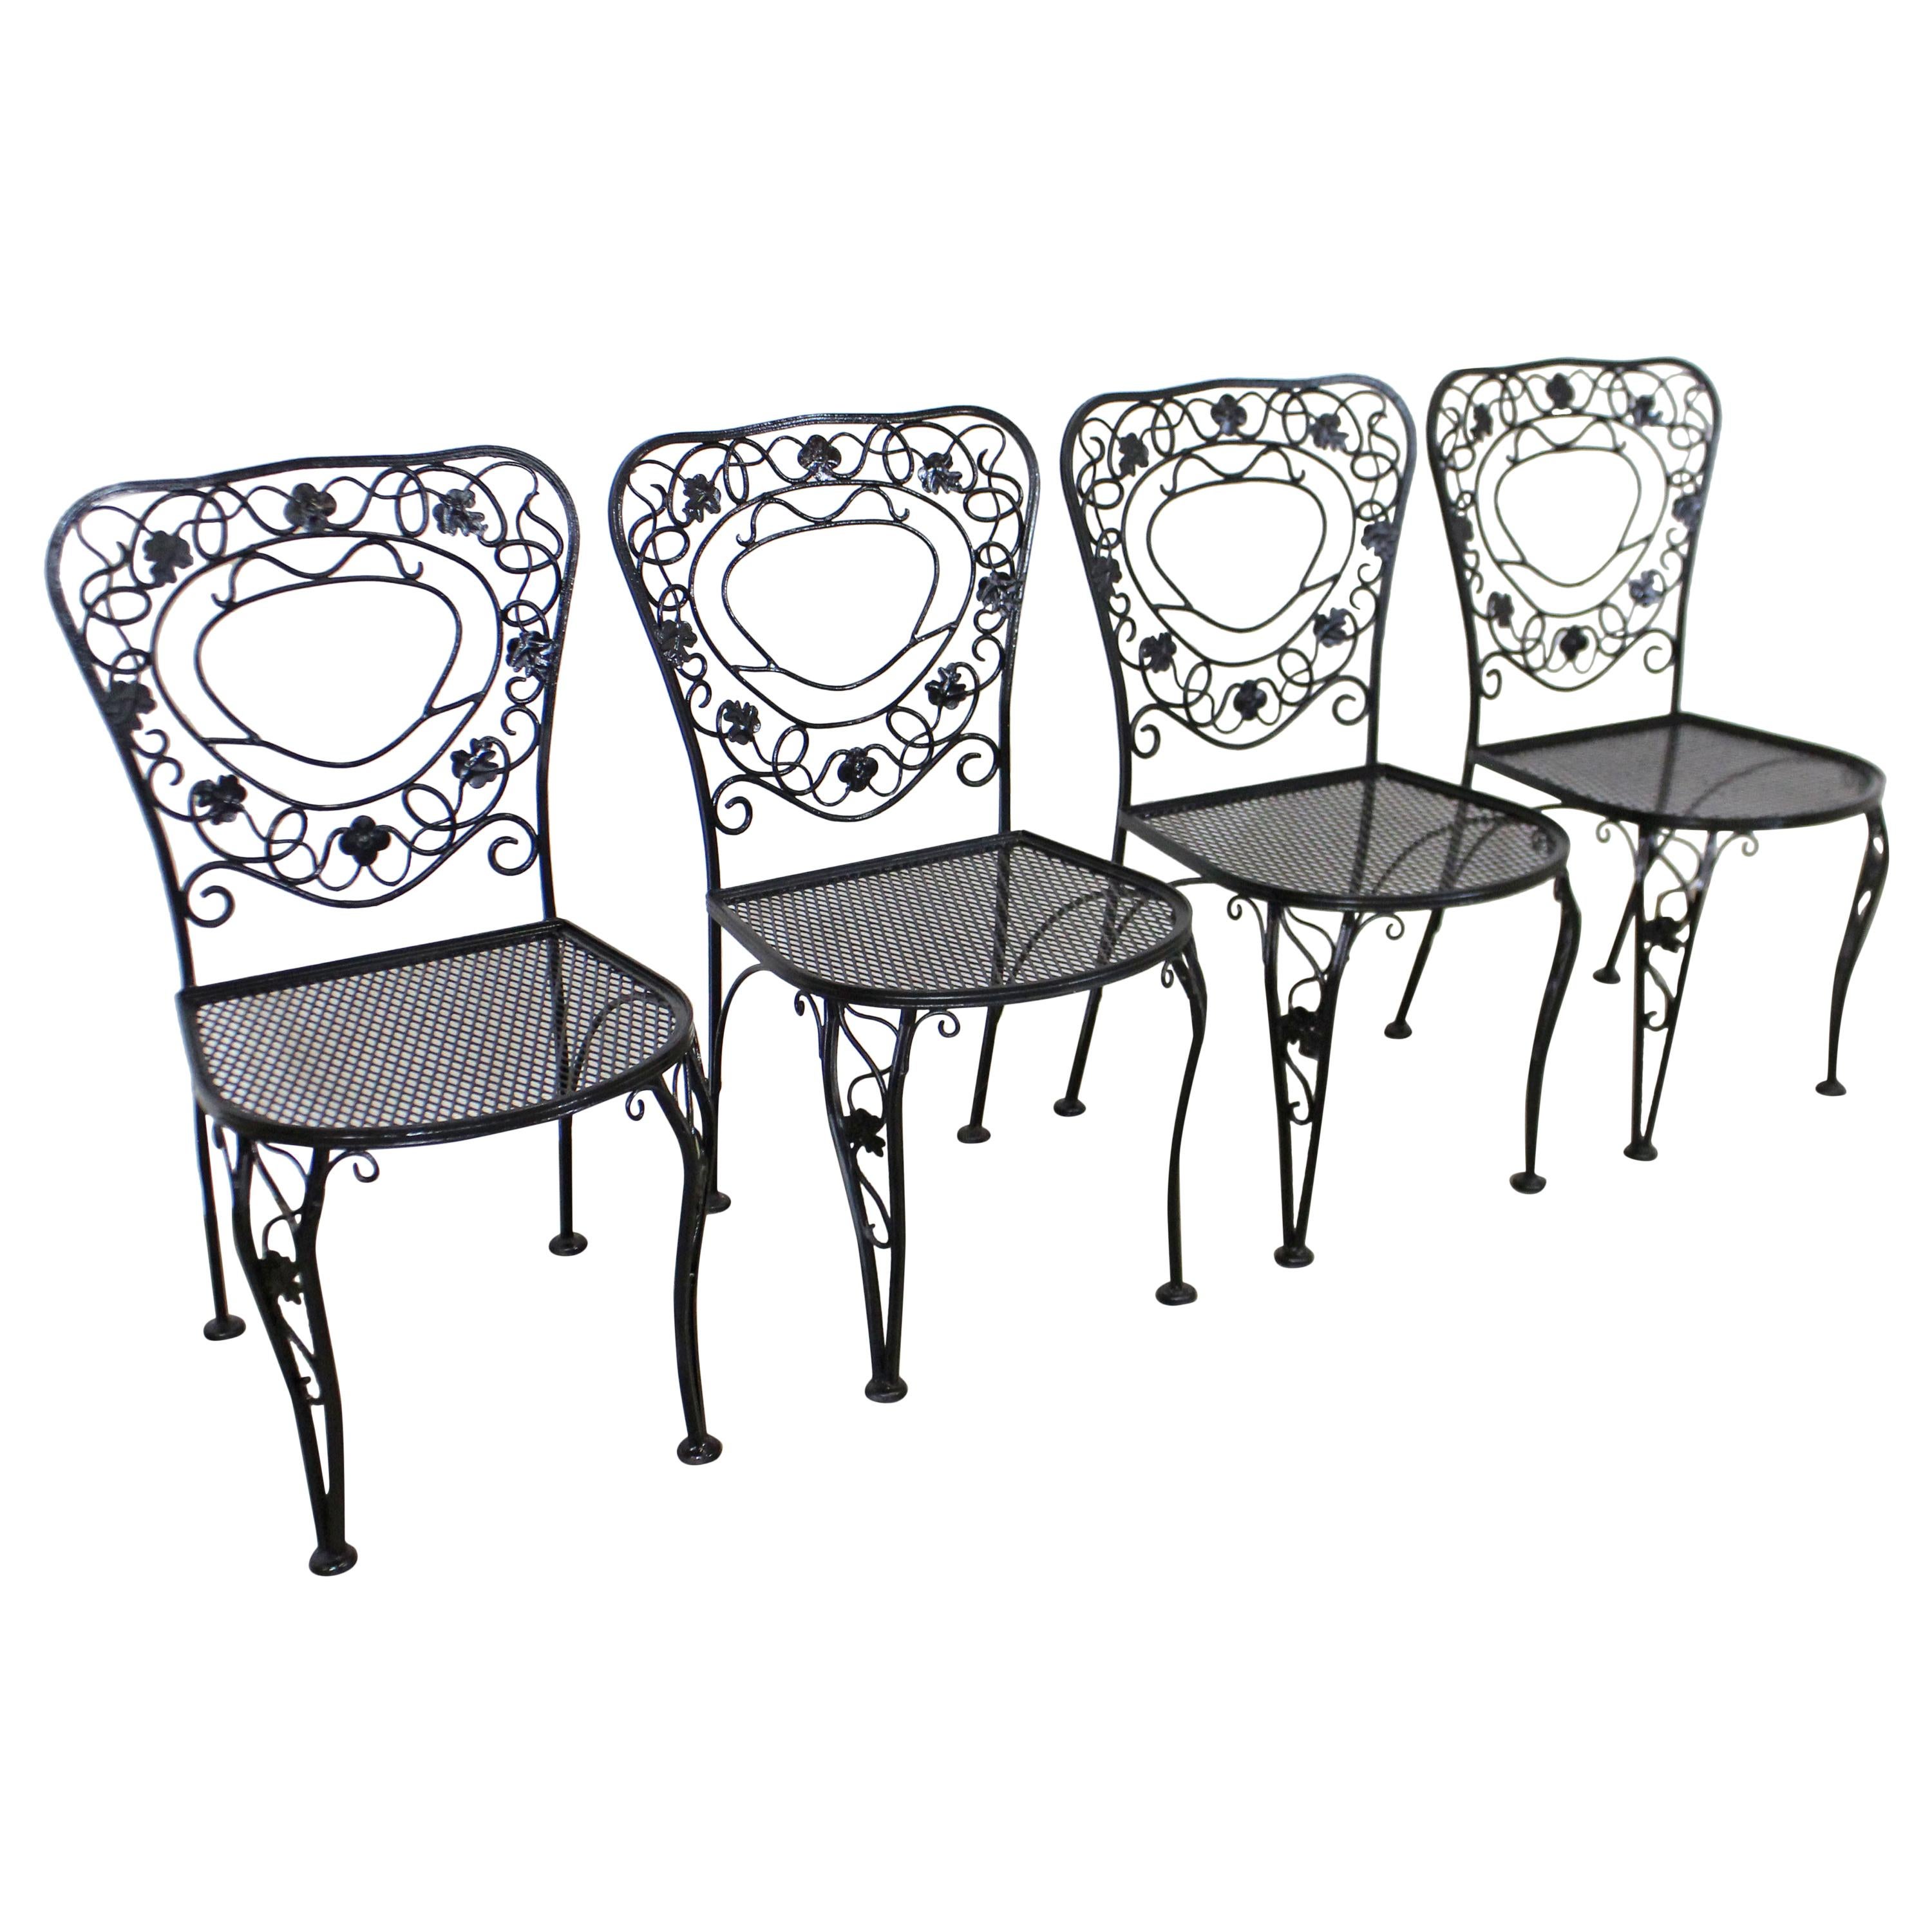 Set of 4 Vintage Meadowcraft Dogwood Wrought Iron Patio Dining Side Chairs